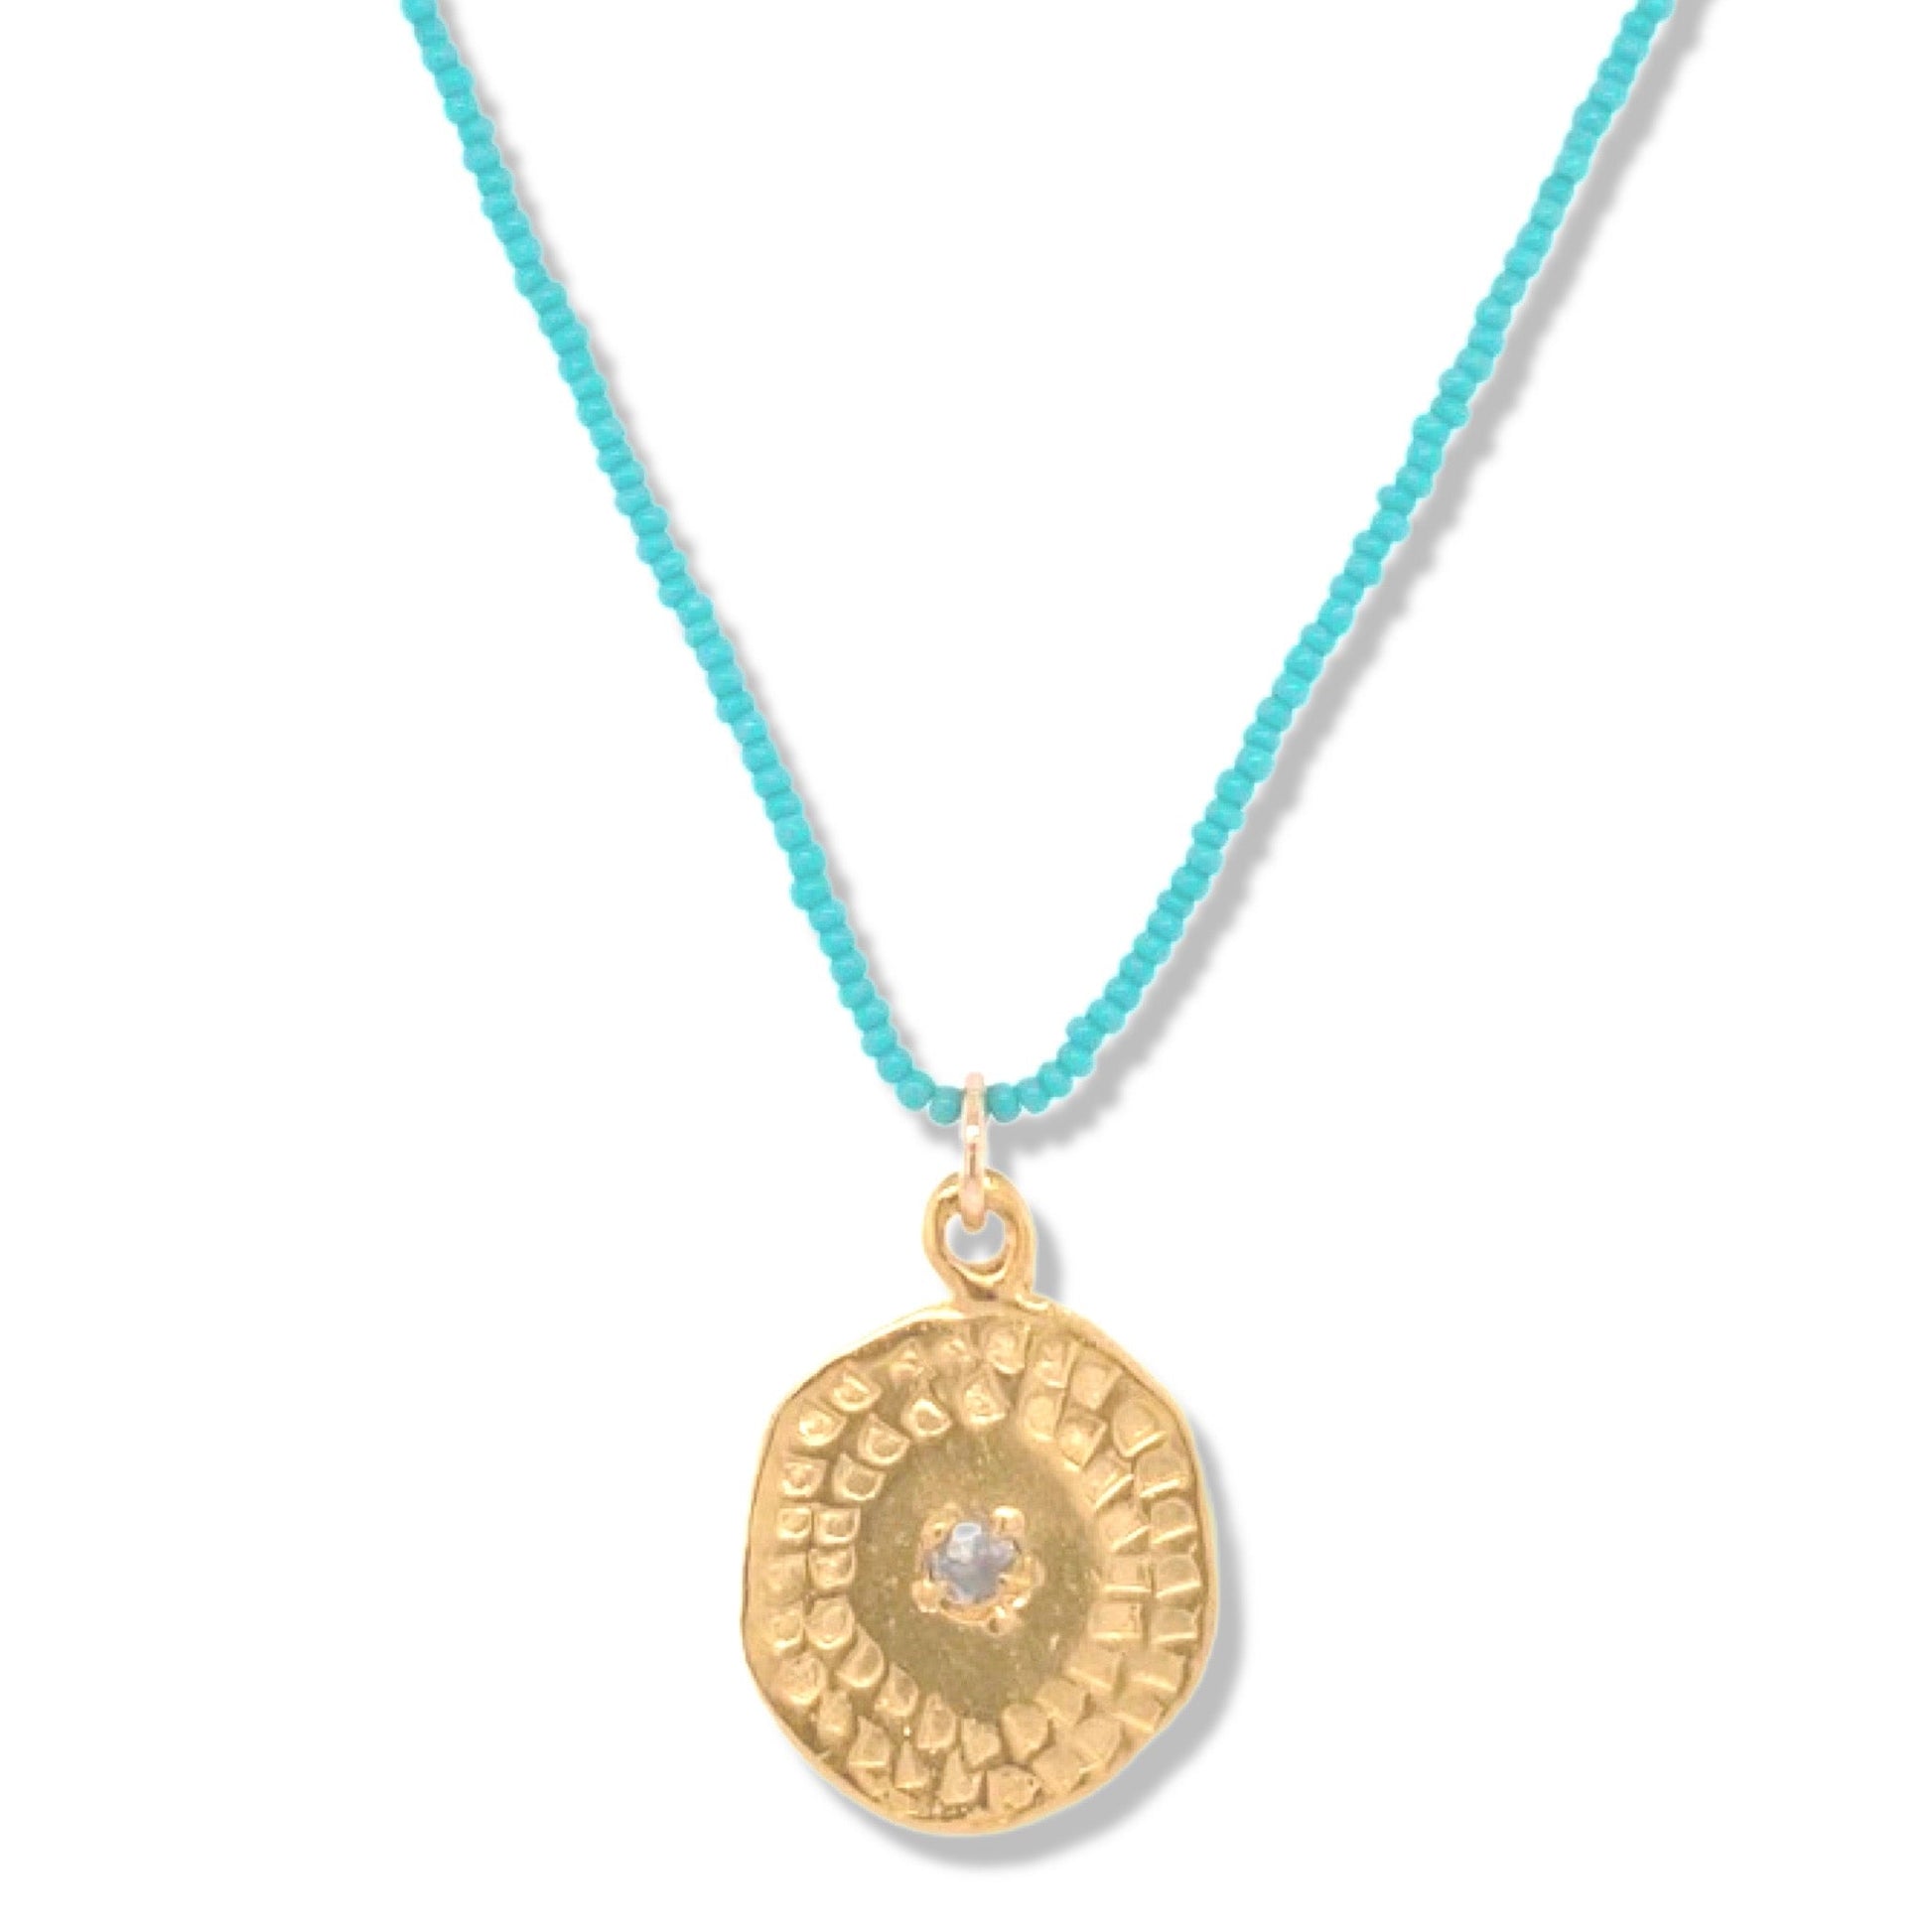 Borderline Imprint Necklace in Gold on Turquoise Tiny Beads | Nalu | Nantucket